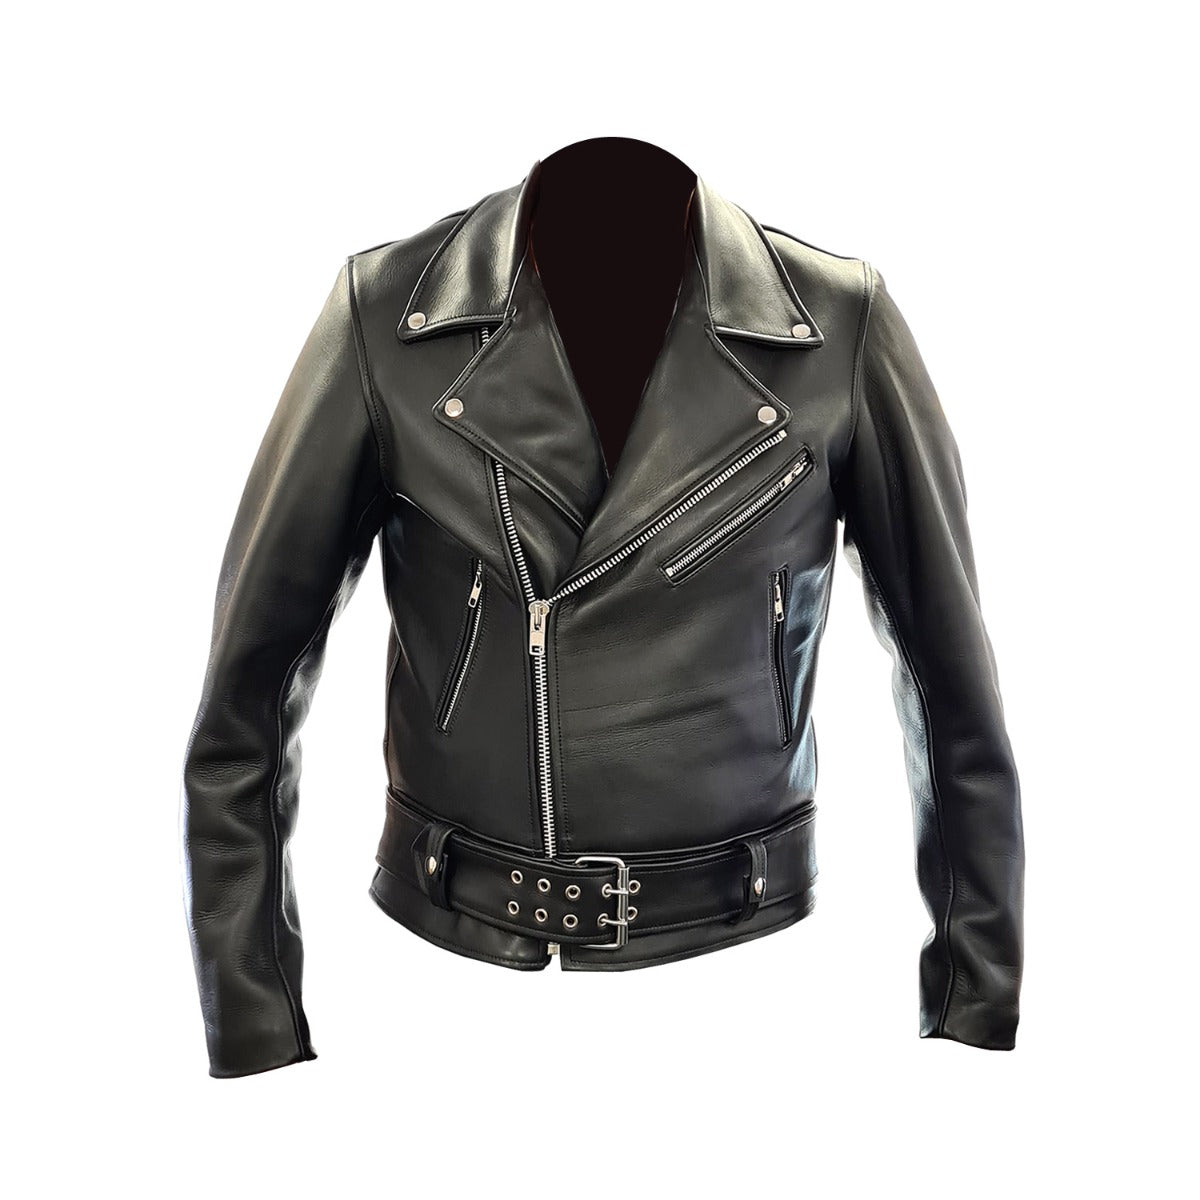 Prowler RED Leather Police Jacket